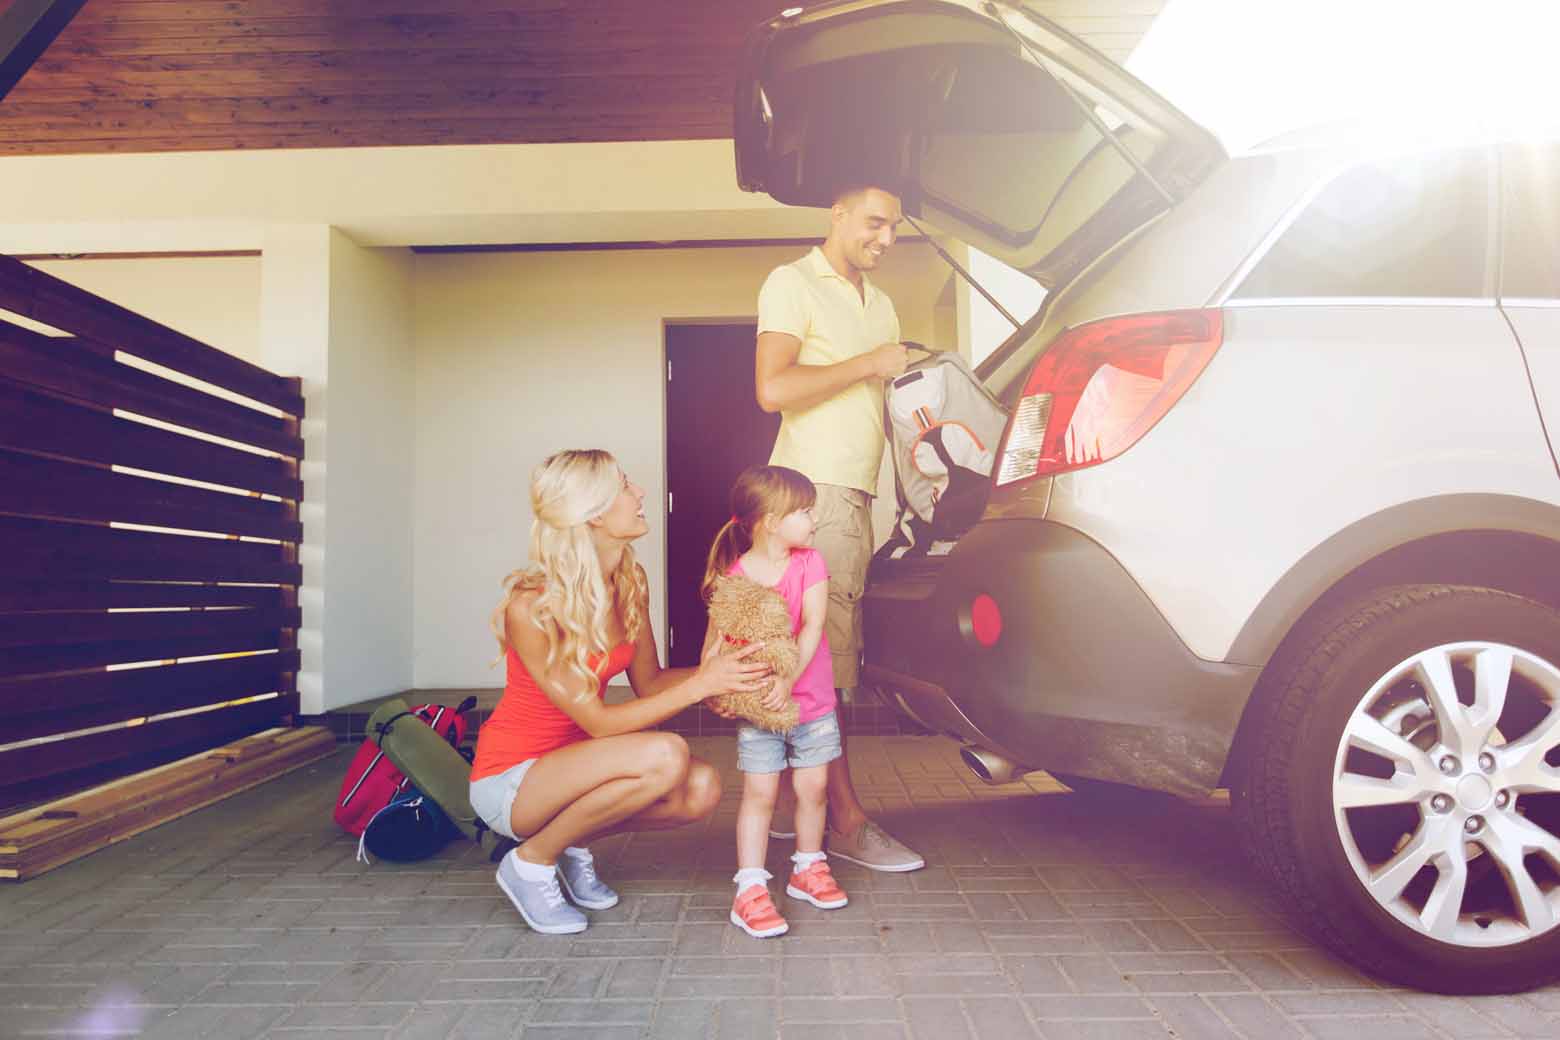 10 Tips for How to Enjoy a Road Trip With Kids